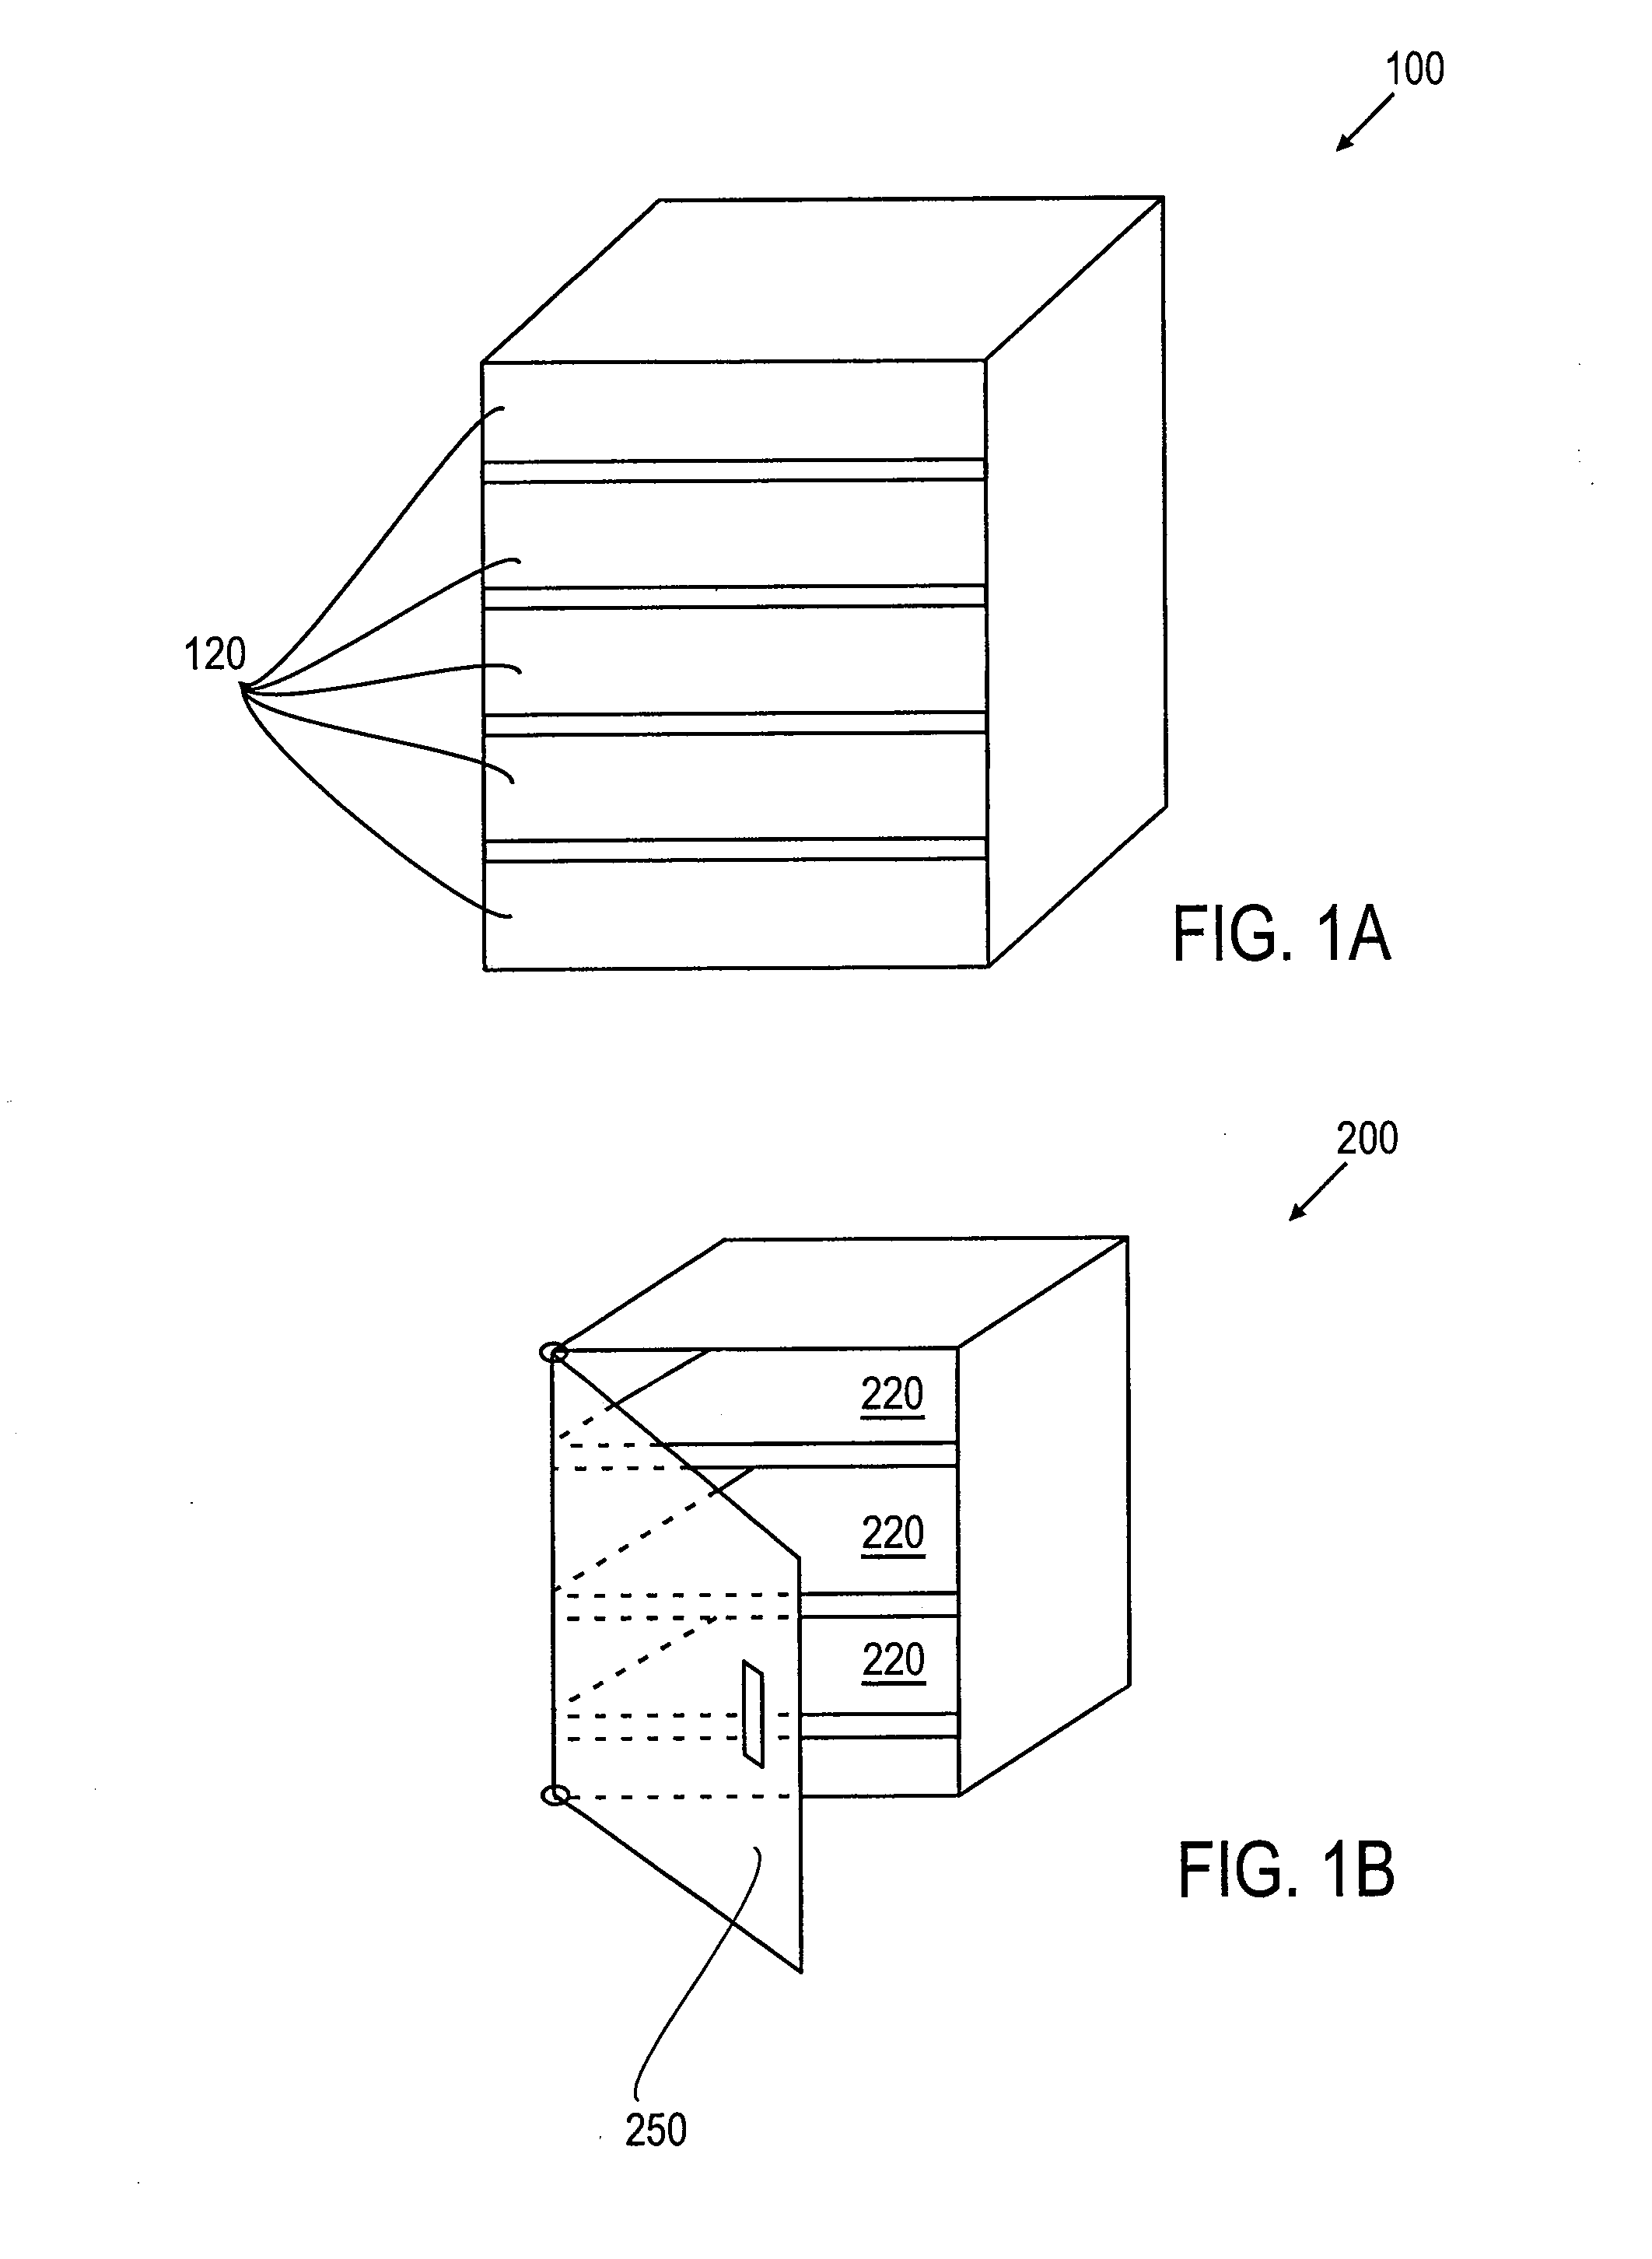 Image-based inventory control system and method